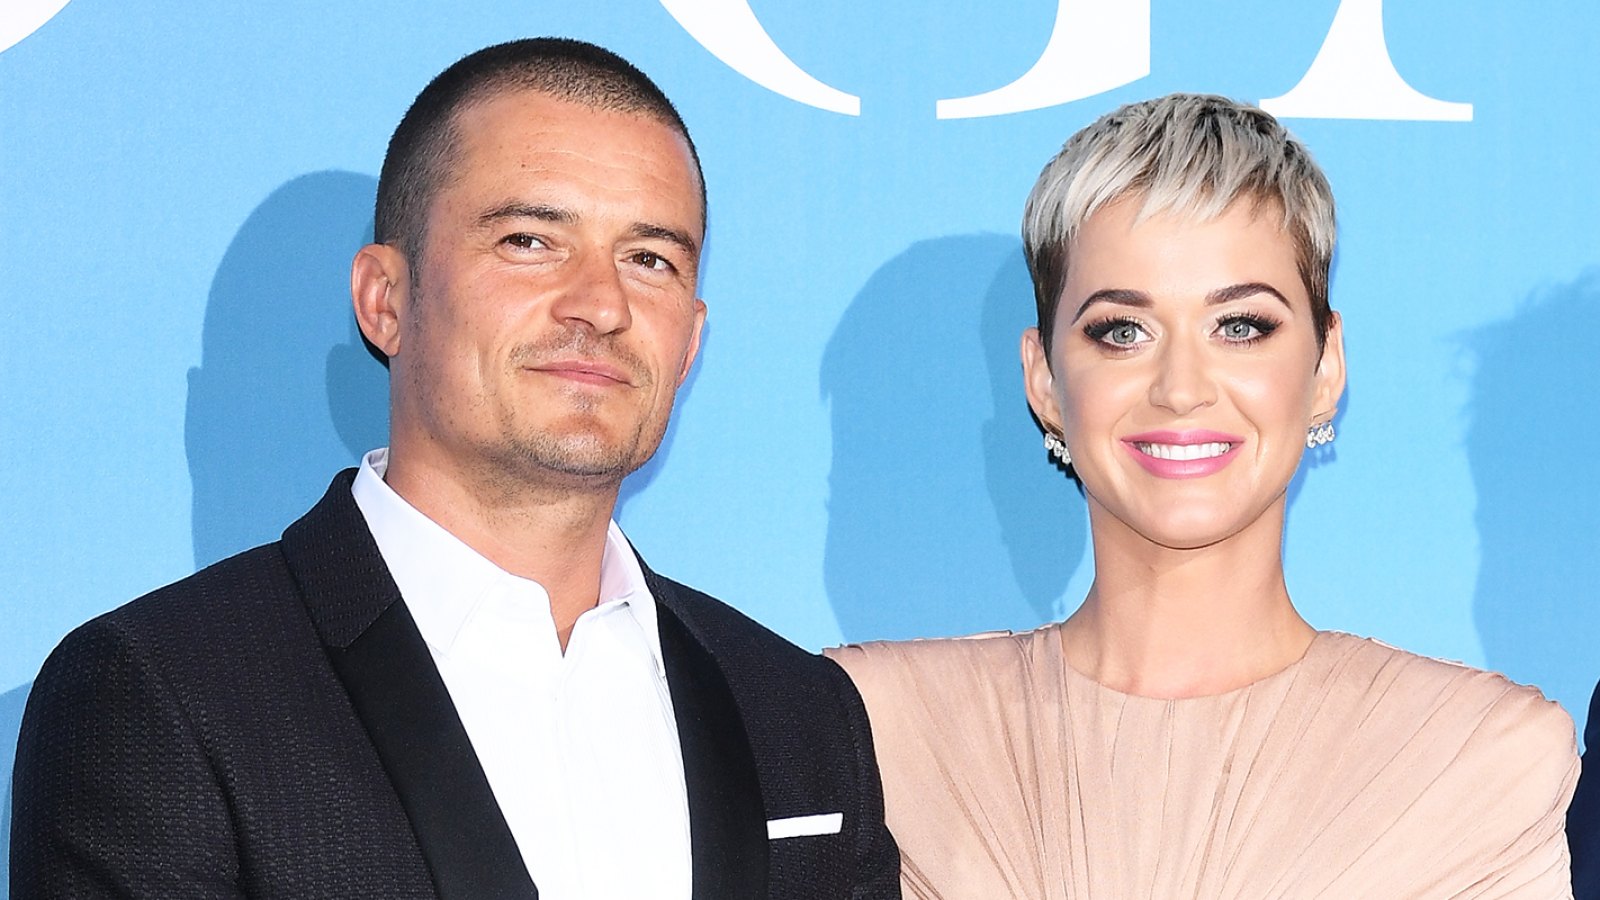 Katy Perry Fans Troll Her After She Refers to Fiance Orlando Bloom as Her Boyfriend